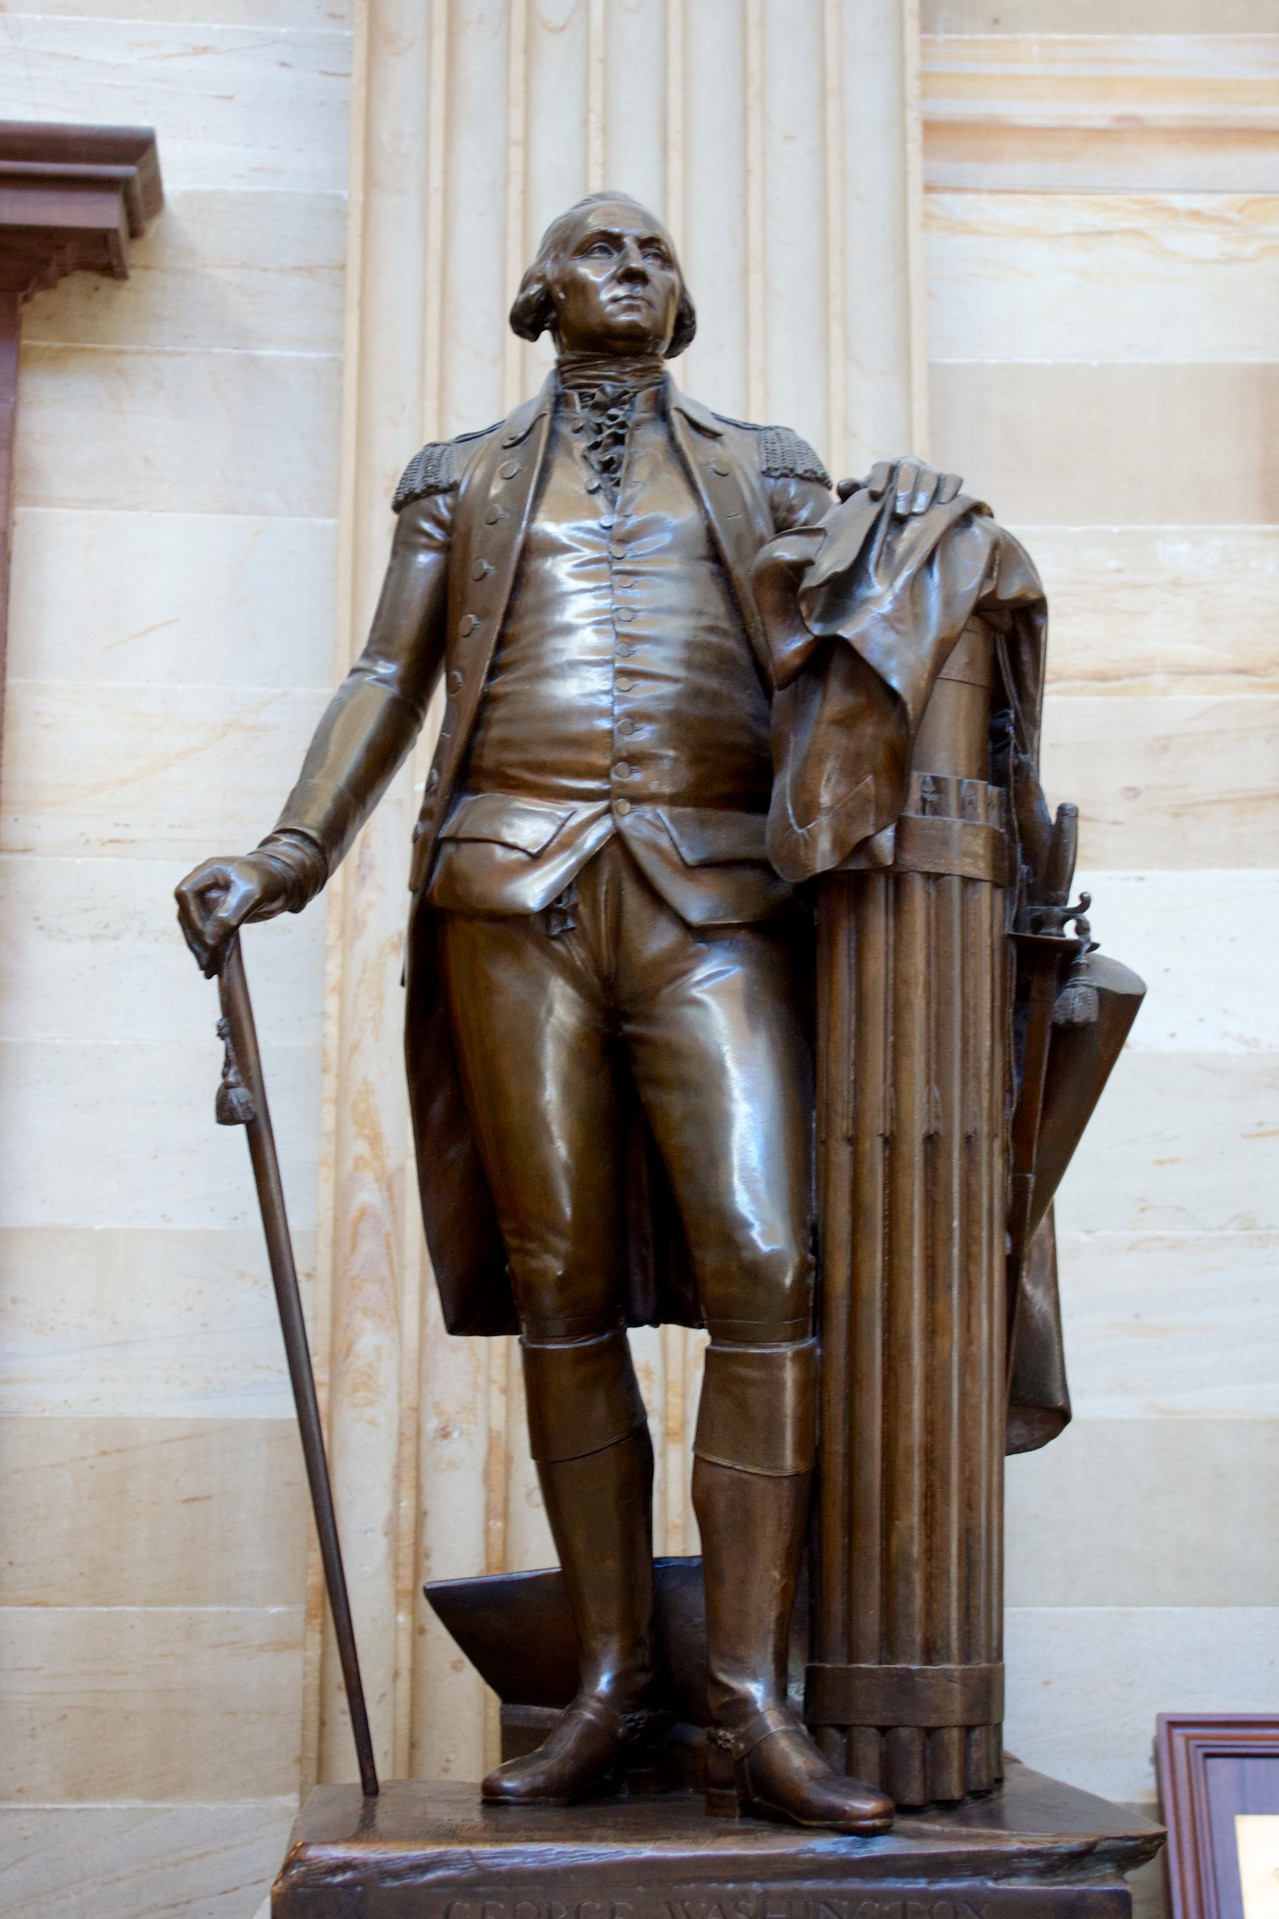 Tall statue of George Washington stands in the Capitol rotunda in Washington DC, USA